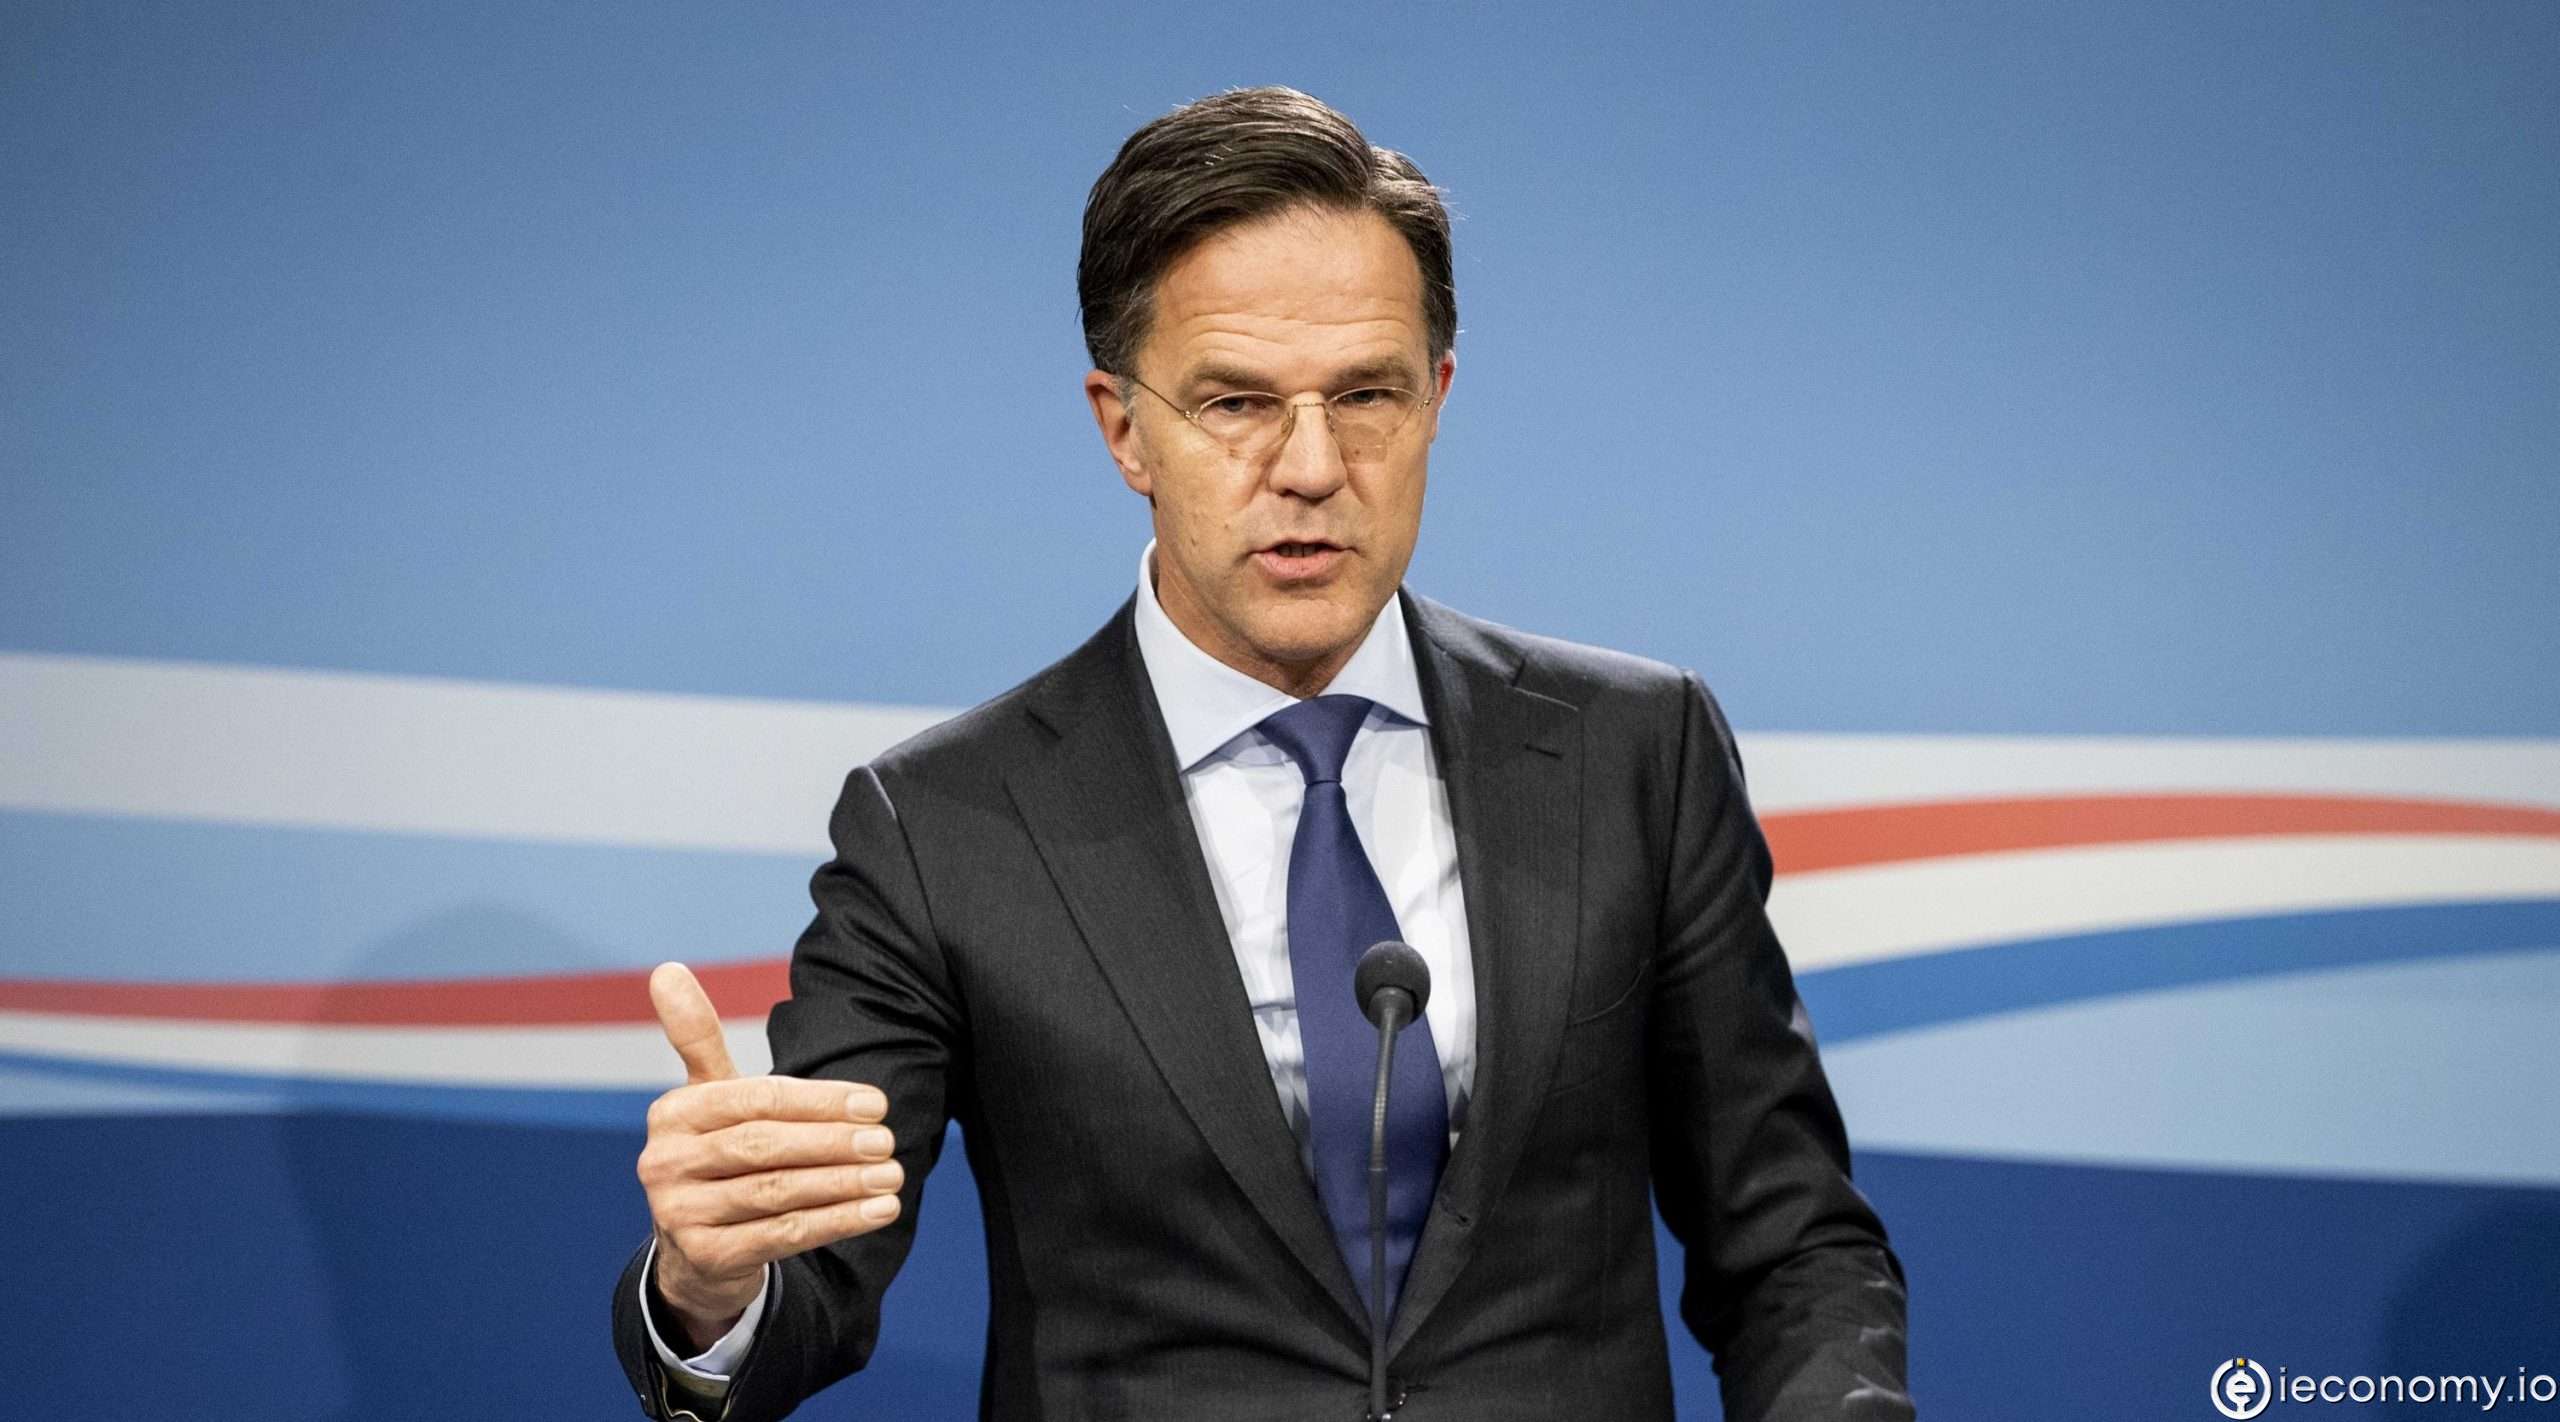 Dutch Prime Minister Mark Rutte: "We Are Getting Poorer Every Day"